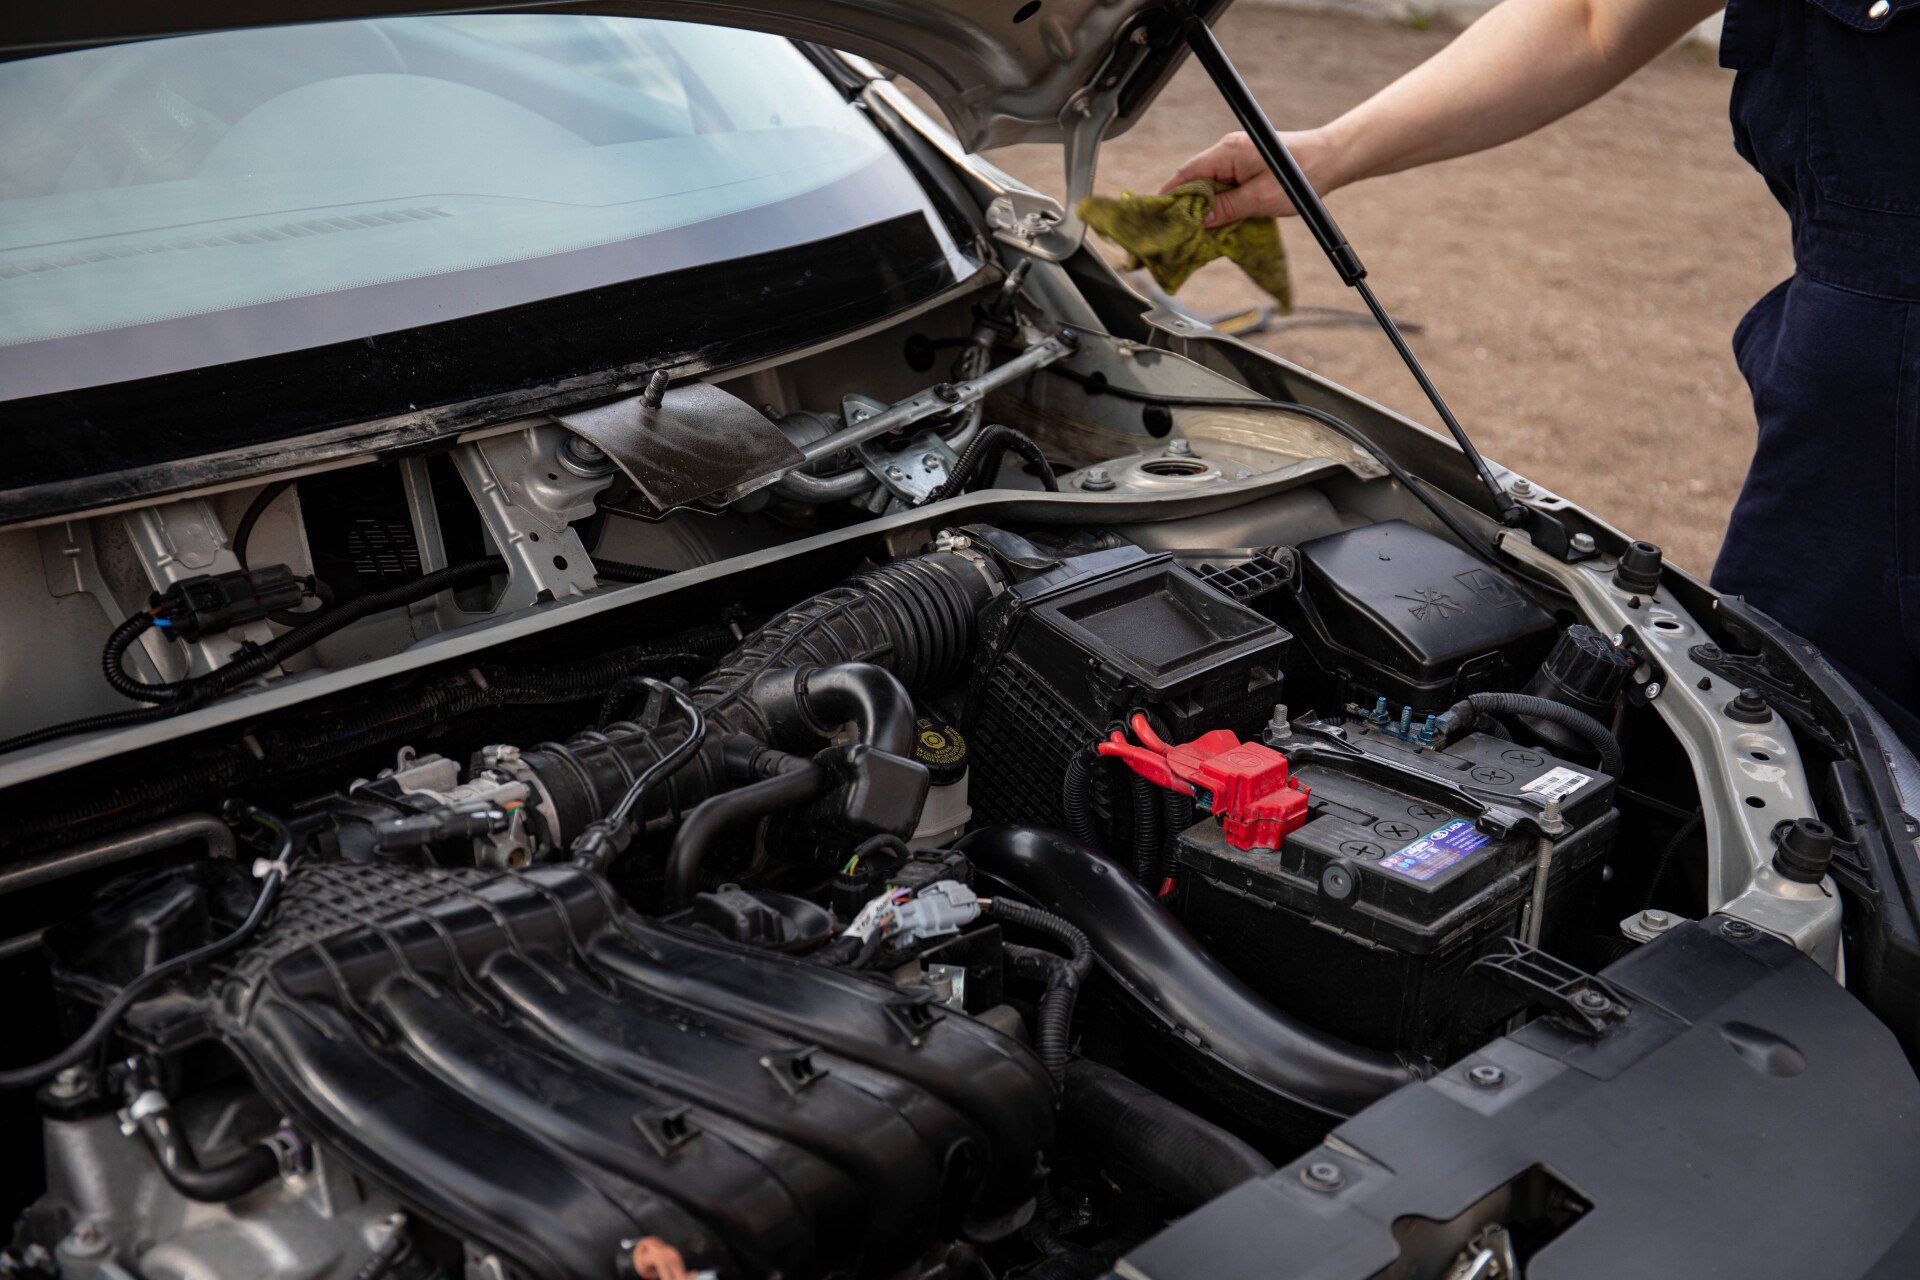 A person is cleaning the engine of a car with a cloth.